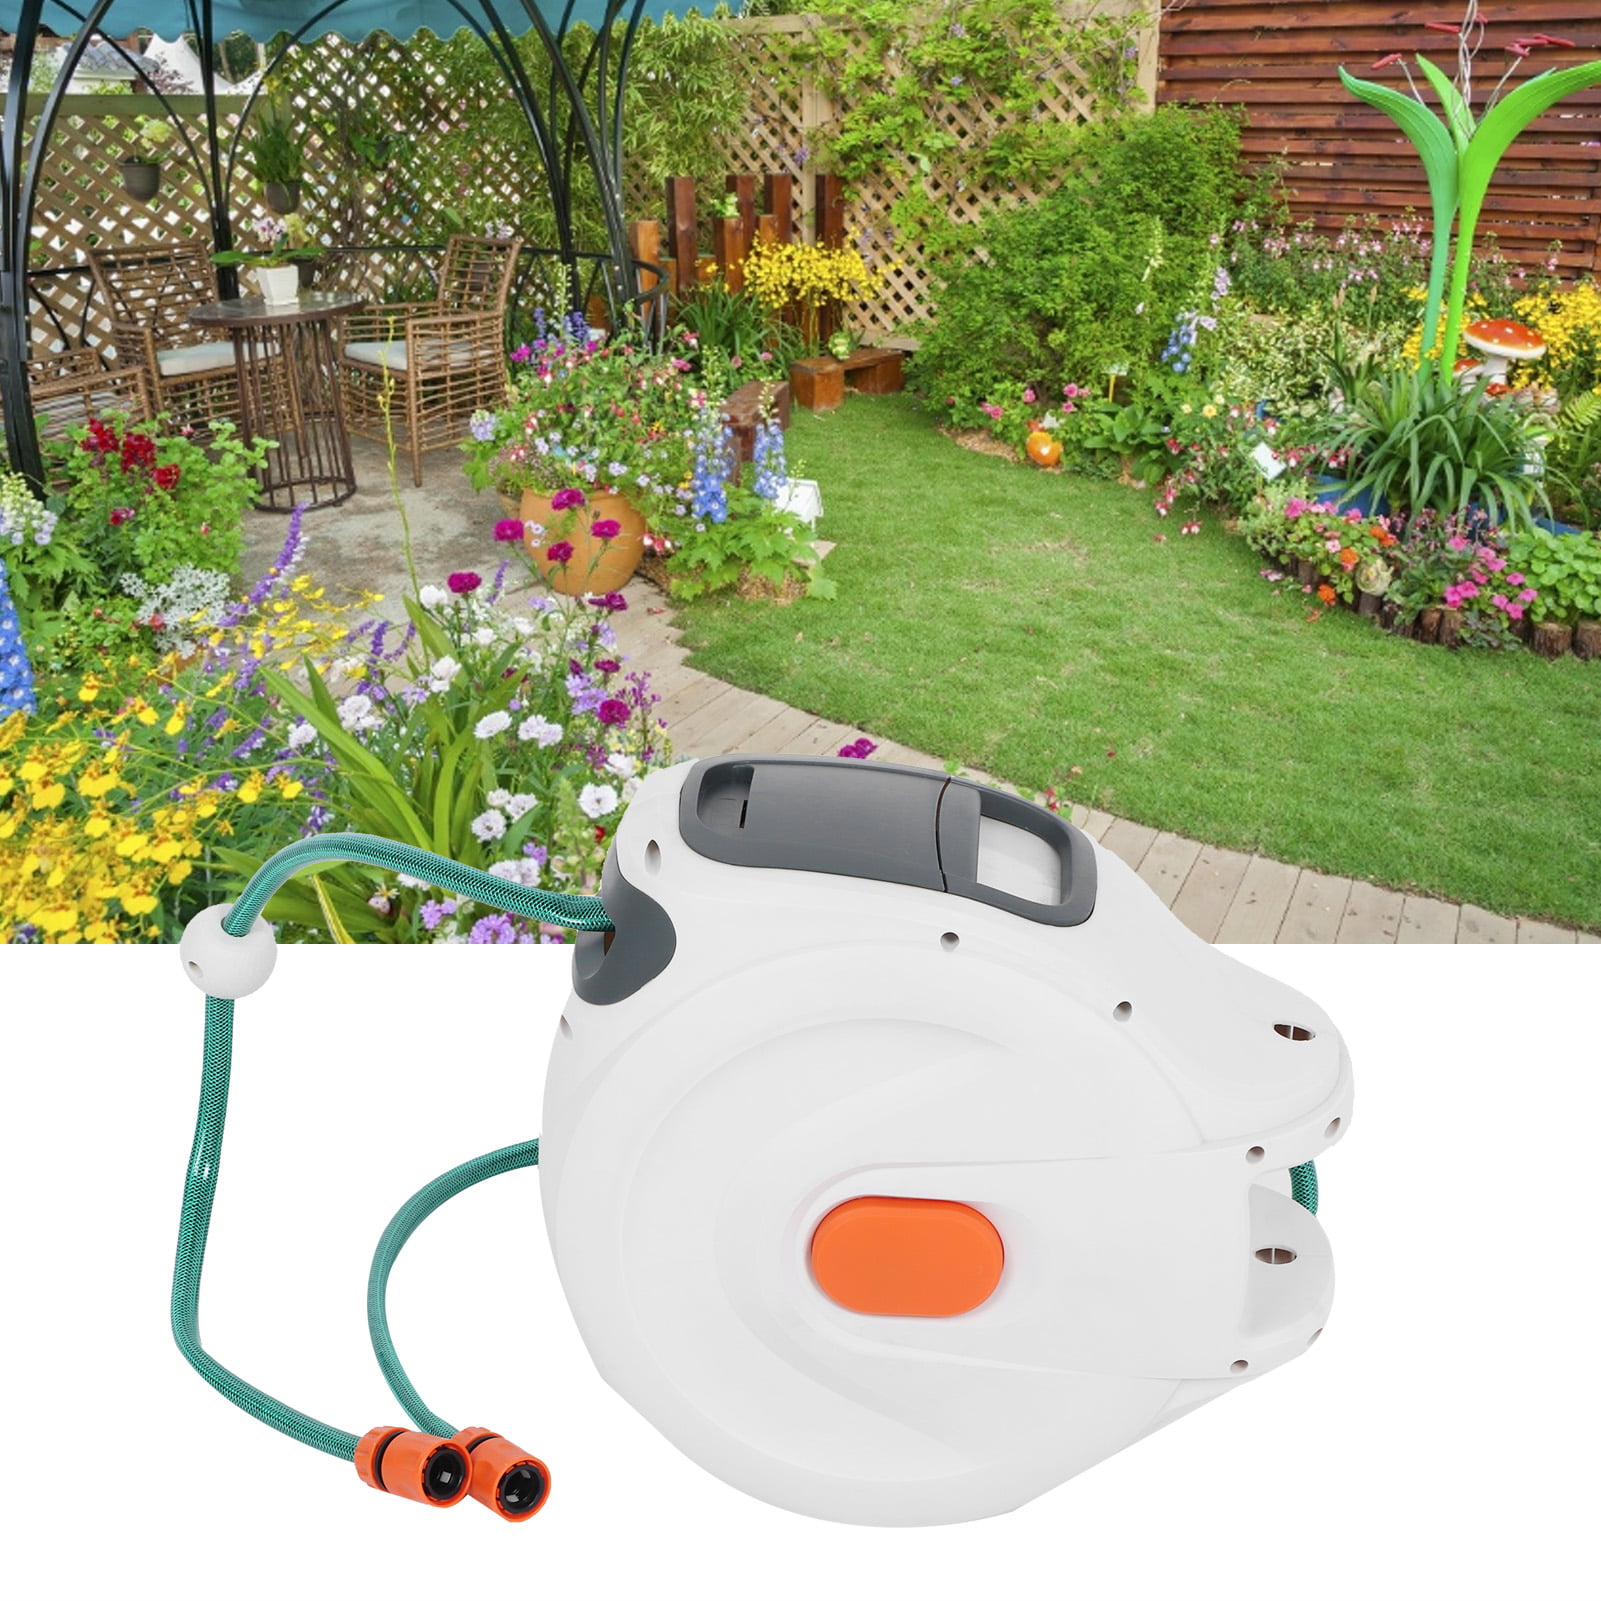 20m Auto Retractable Hosepipe Wall-Mounted on Reel or Portable 180° Swivel 2-in-1 Jet or Spray Garden Hose Reel Wall Mounted